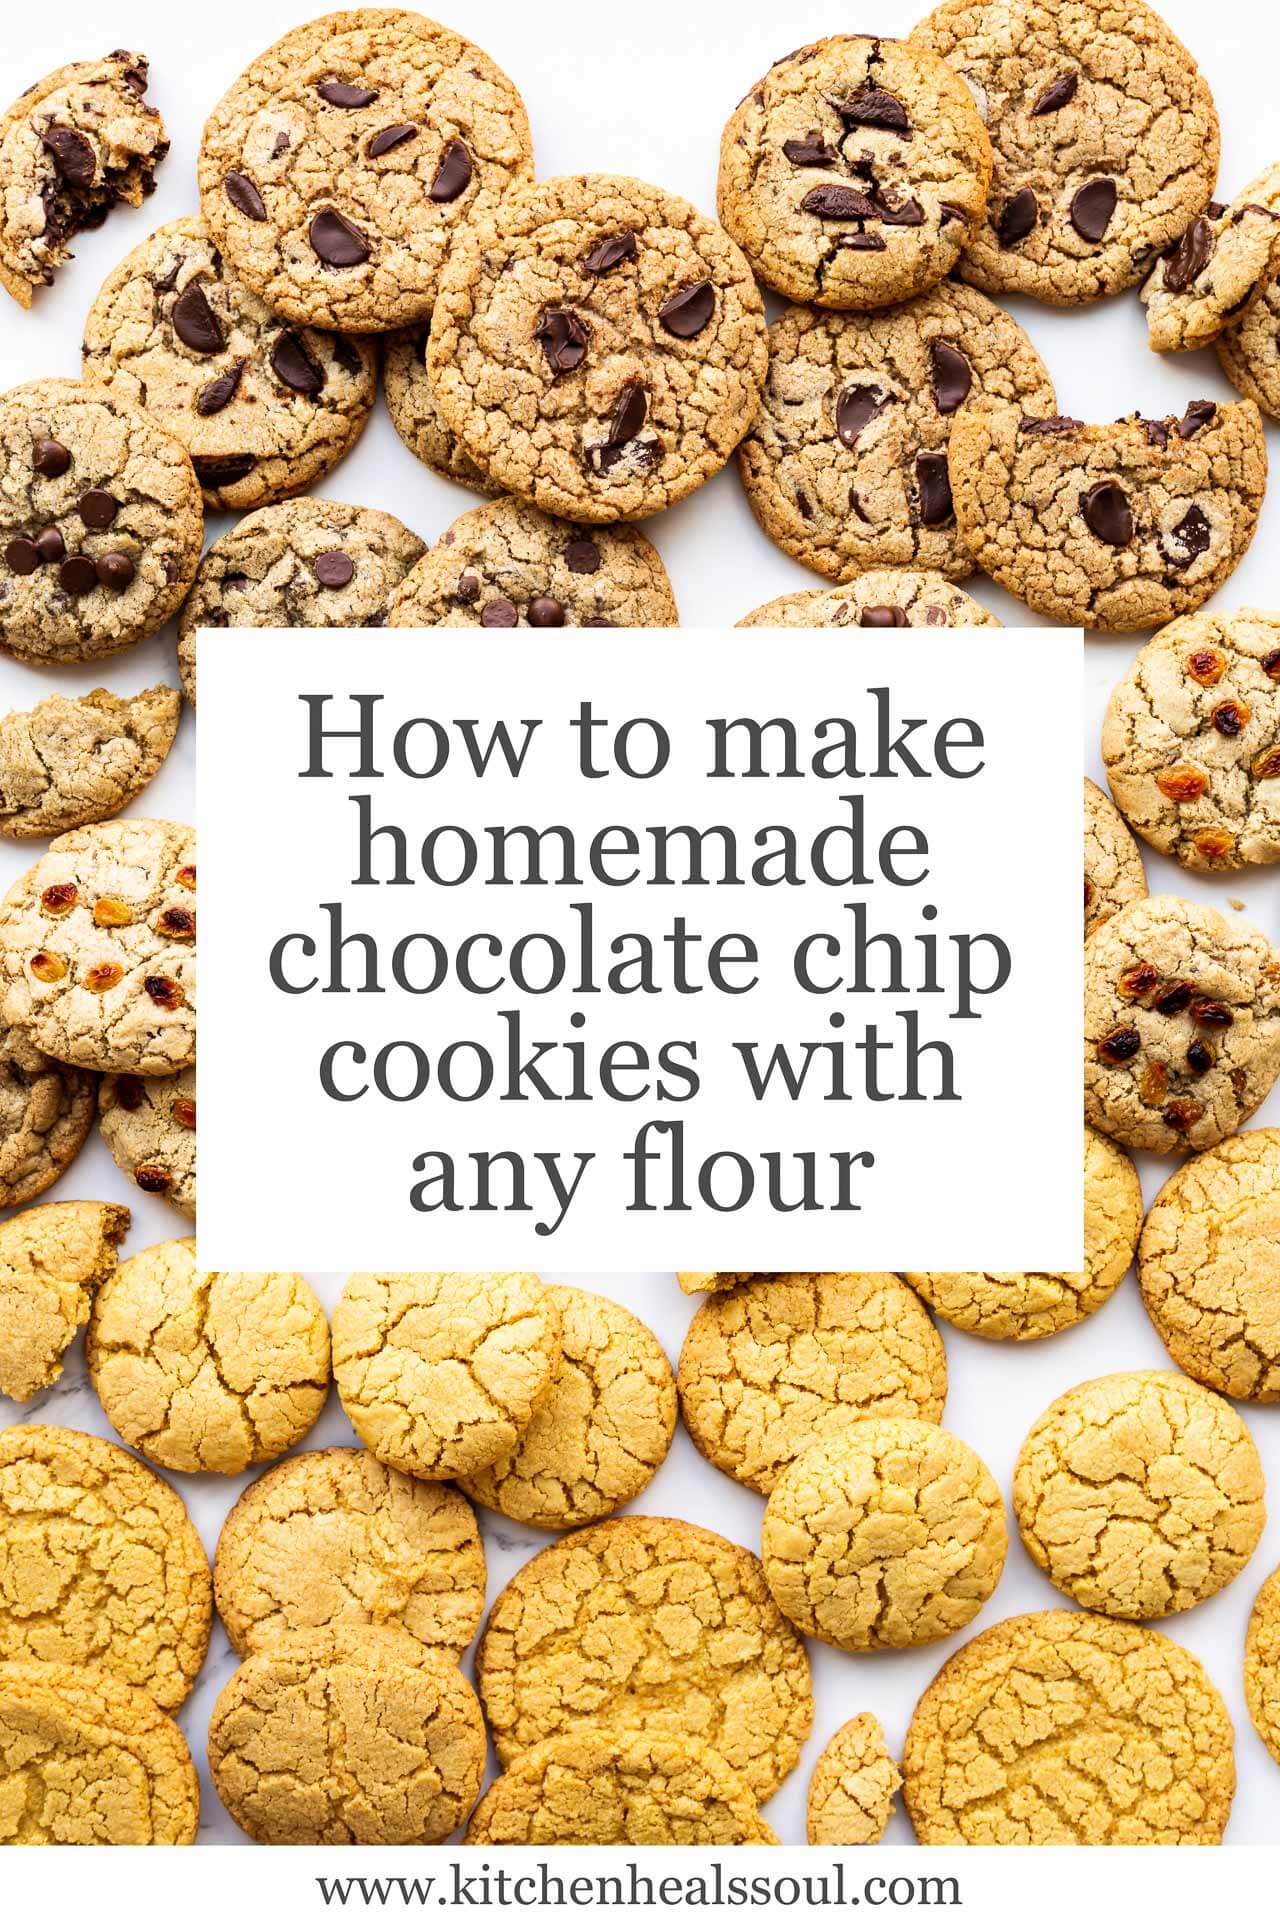 Image filled with homemade chocolate chip cookies made with different flours, including whole wheat flour, buckwheat flour, oat flour, and even corn flour (producing yellower cookies)